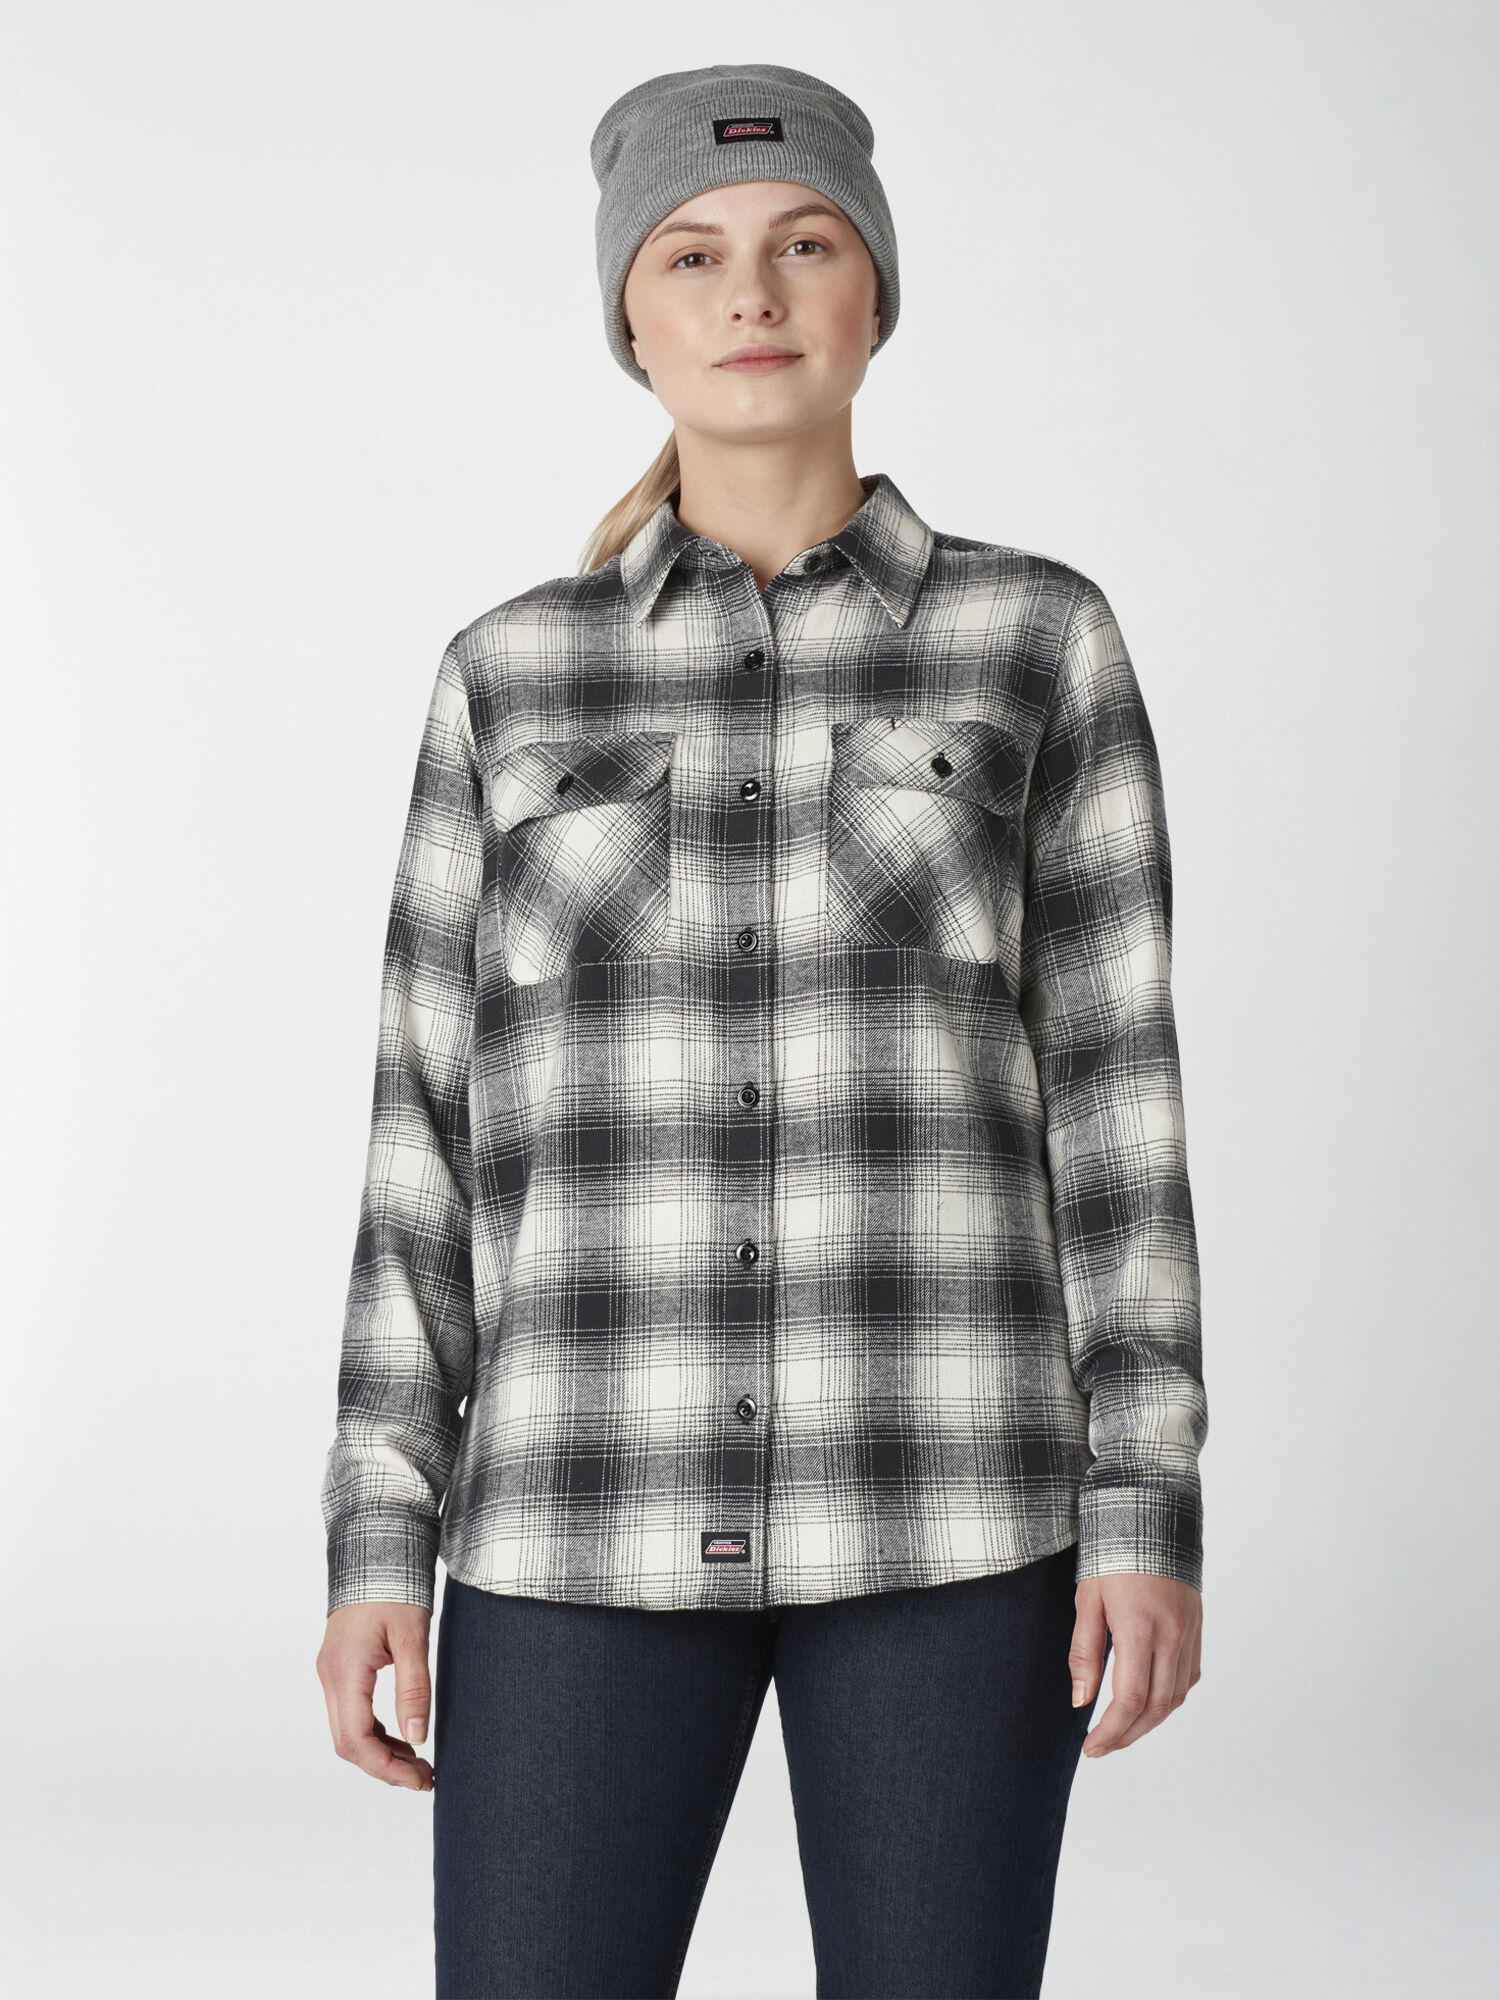 Dickies Women's Long Sleeve Flannel (Various Colors) $12.50 + Free Shipping